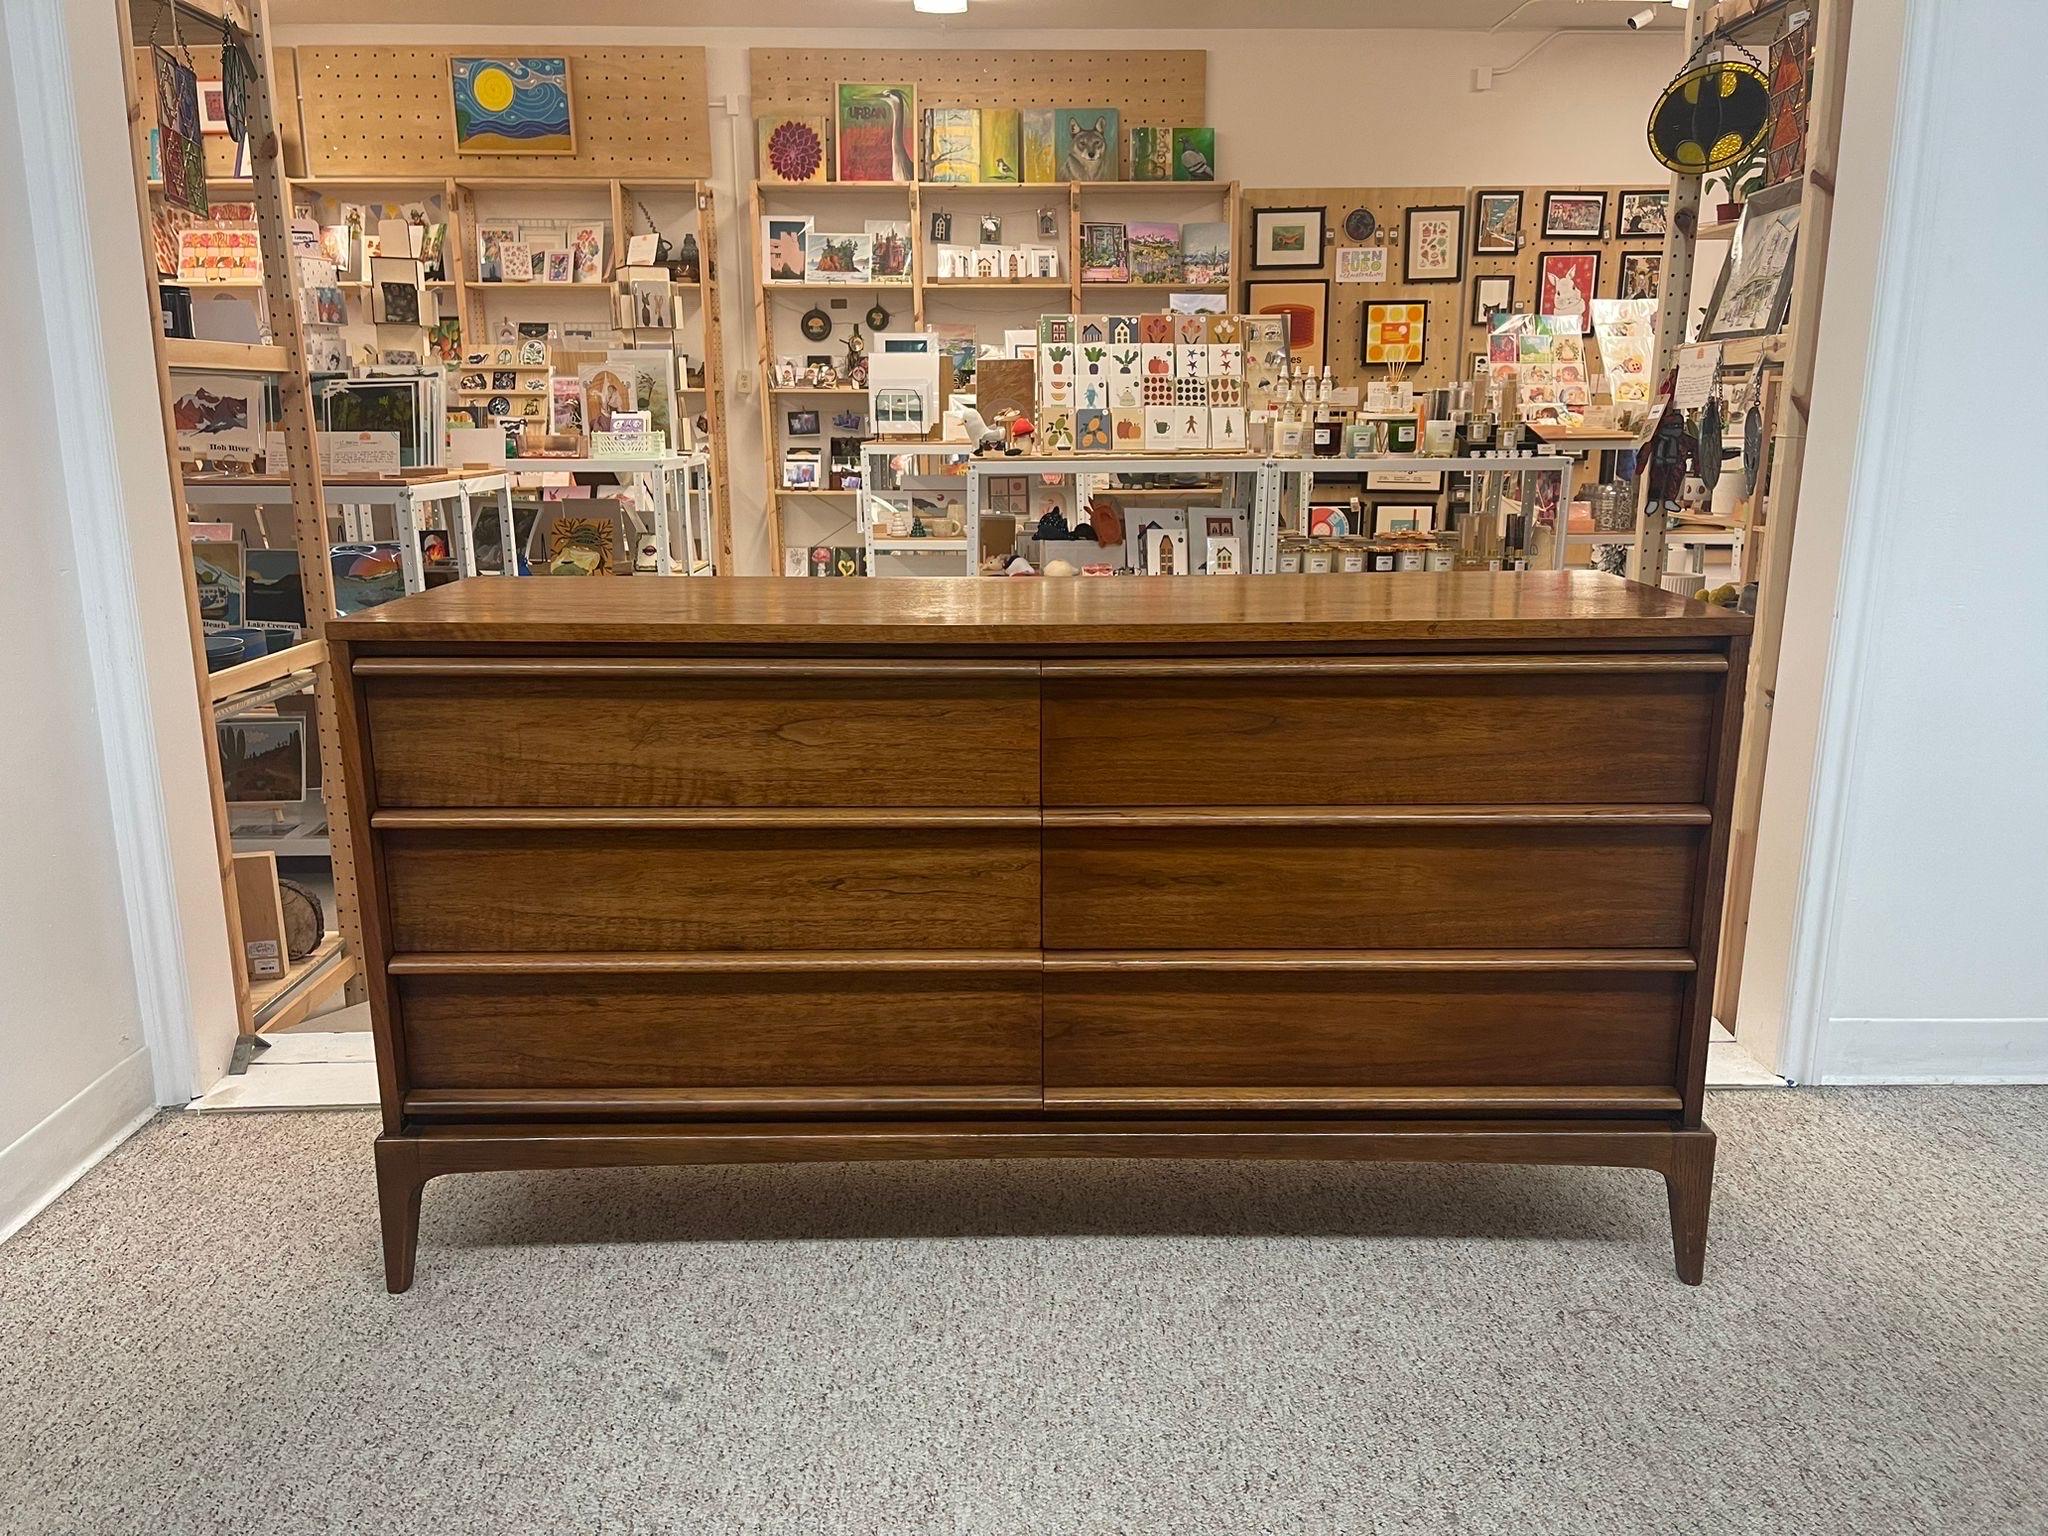 This Vintage 6 Drawer Dresser has Tapered Legs and Dovetail Drawers Consistent with Mid Century Design. Nice Wood Grain. Circa 1960s/1970s. Vintage Condition Consistent with Age as Pictured.

Dimensions. 65 W ; 18 D ; 31 H